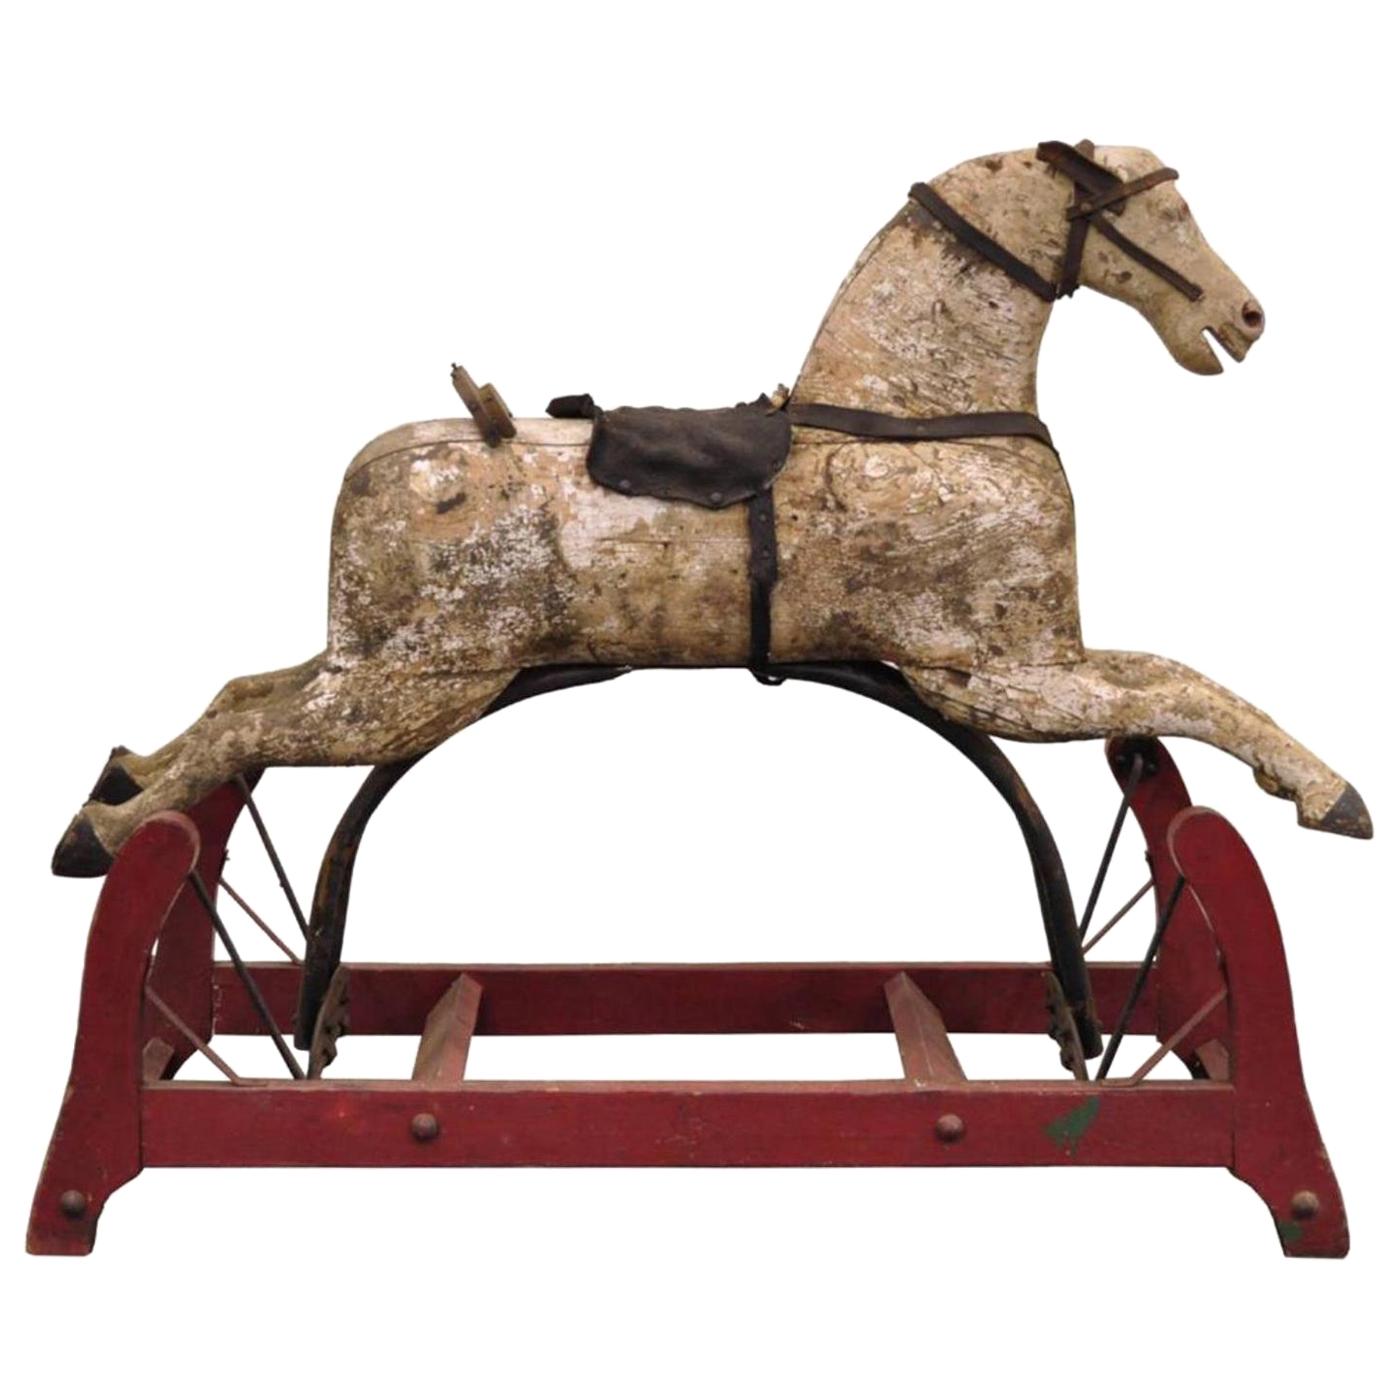 19th Century American Primitive Carved Wood Cast Iron Glider Rocking Hobby Horse For Sale